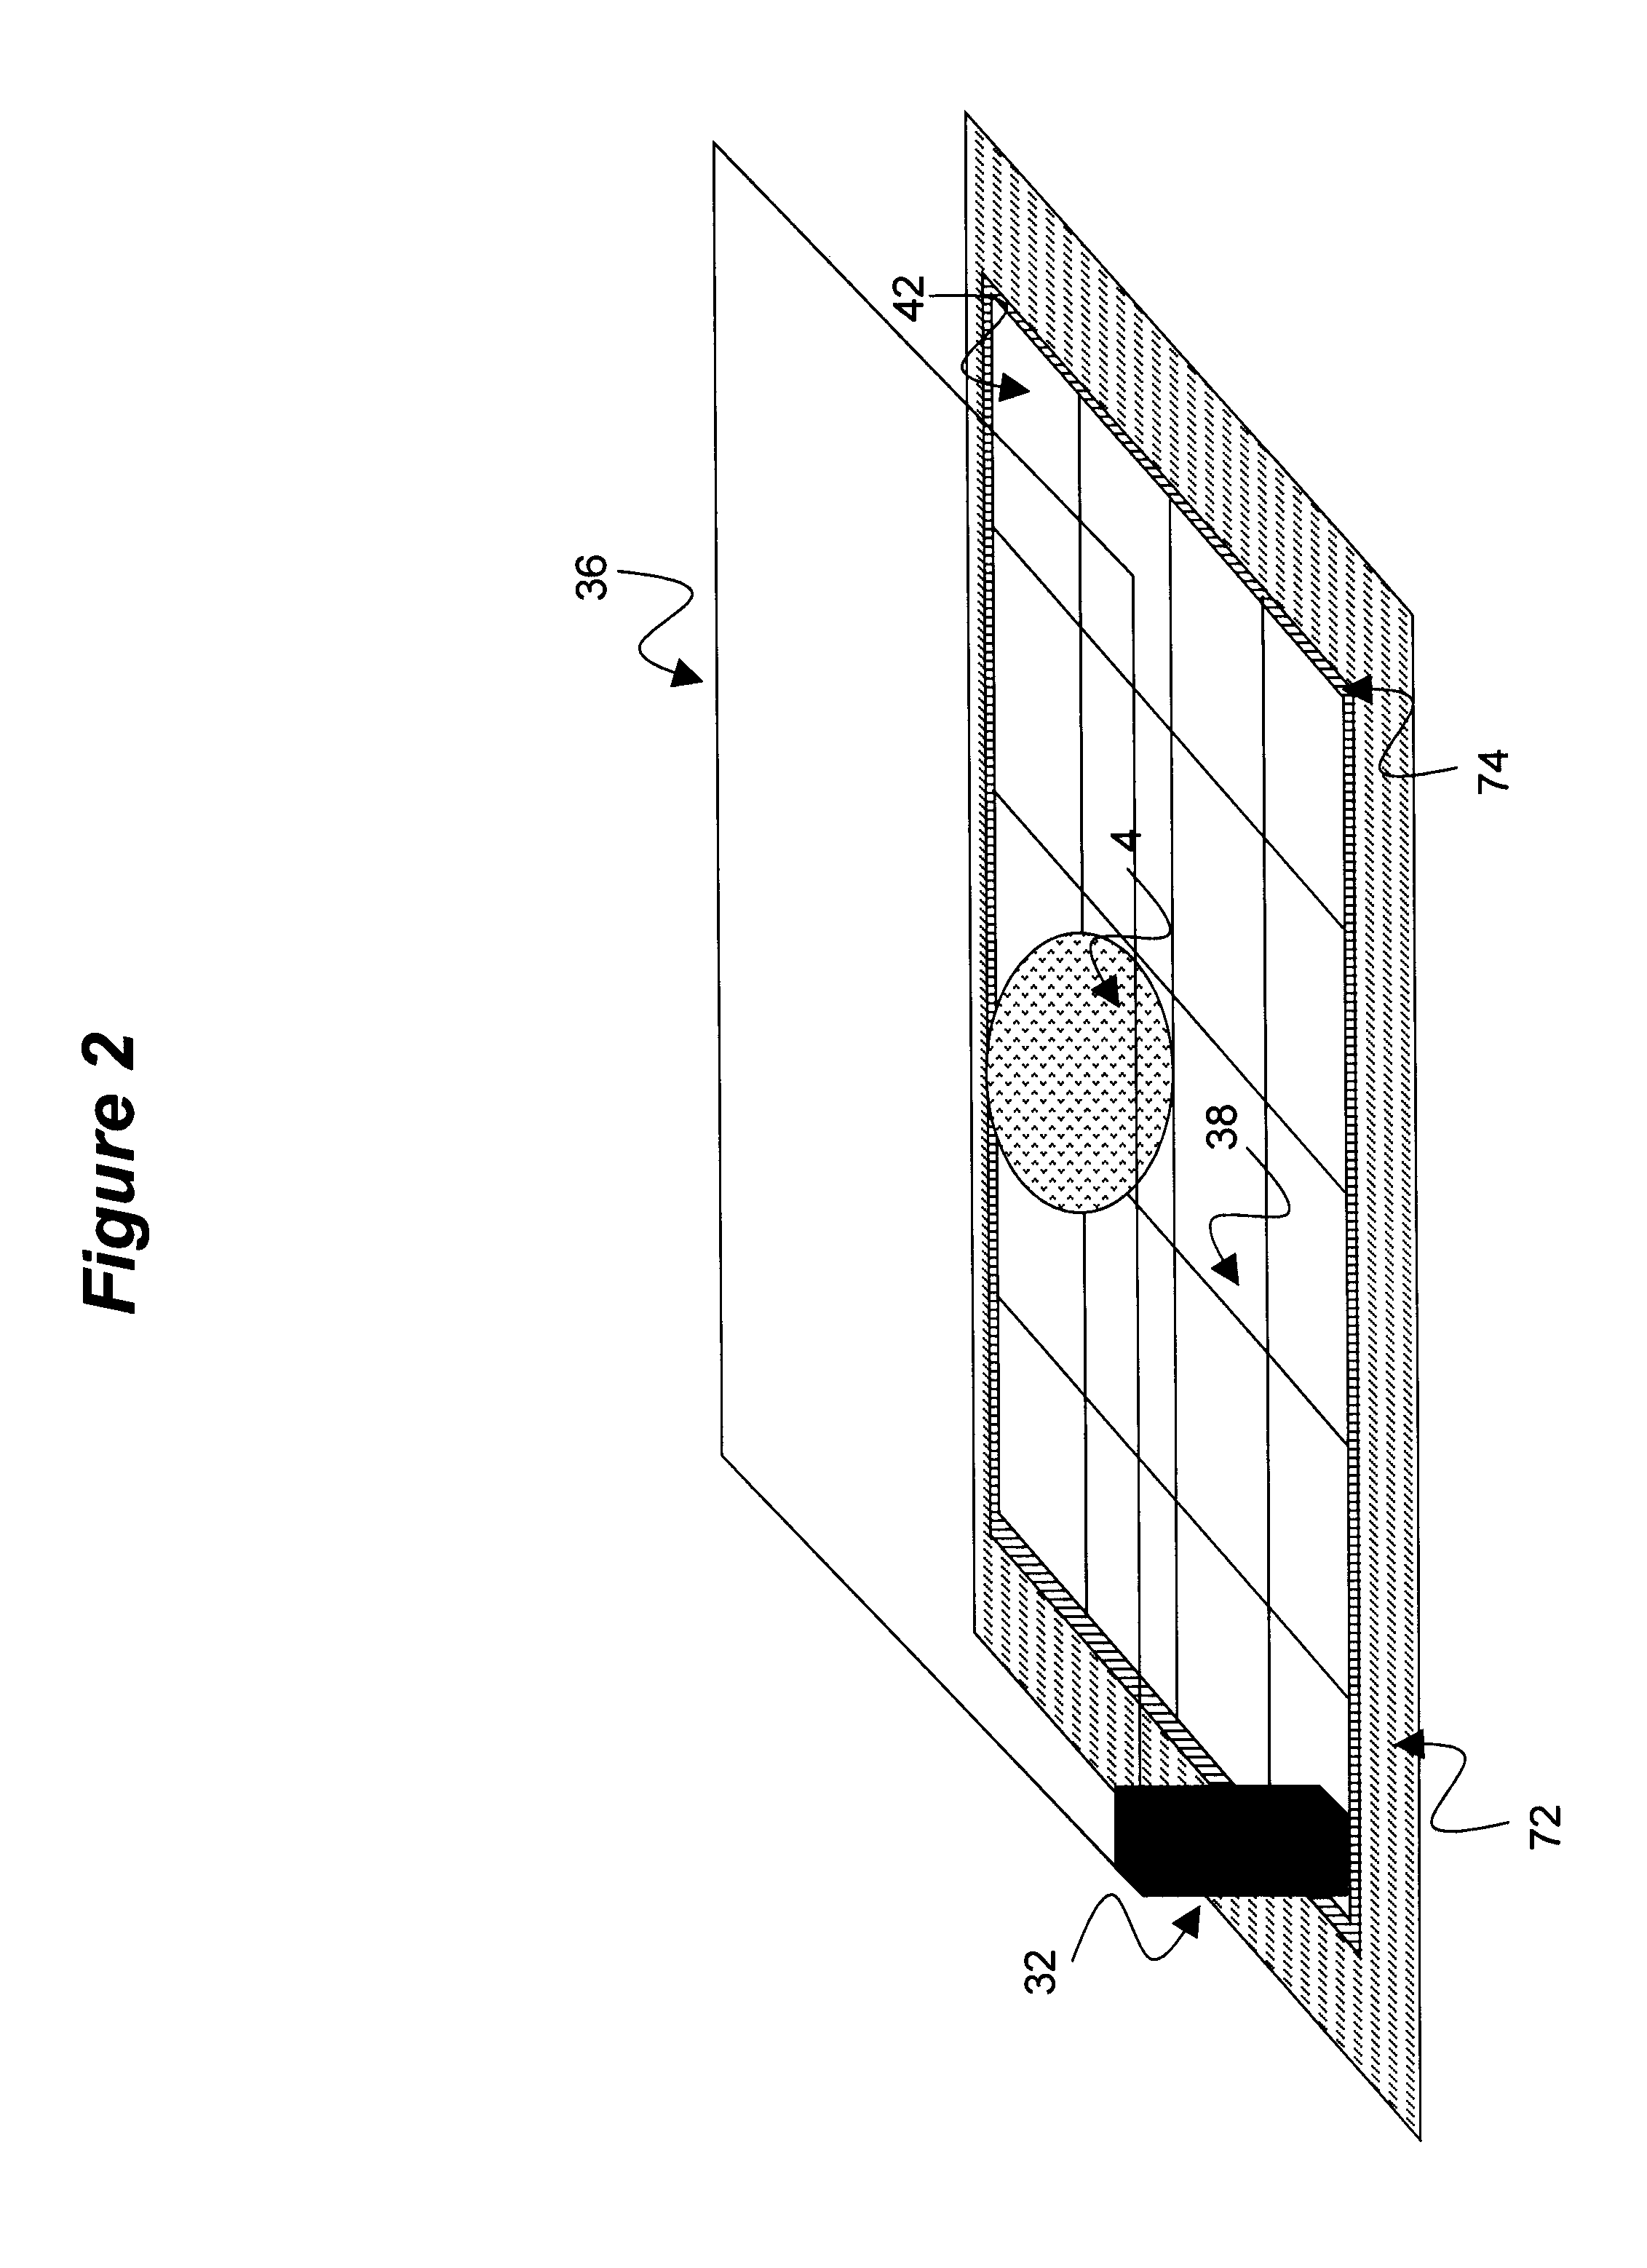 AM-EWOD device and method of driving with variable voltage AC driving